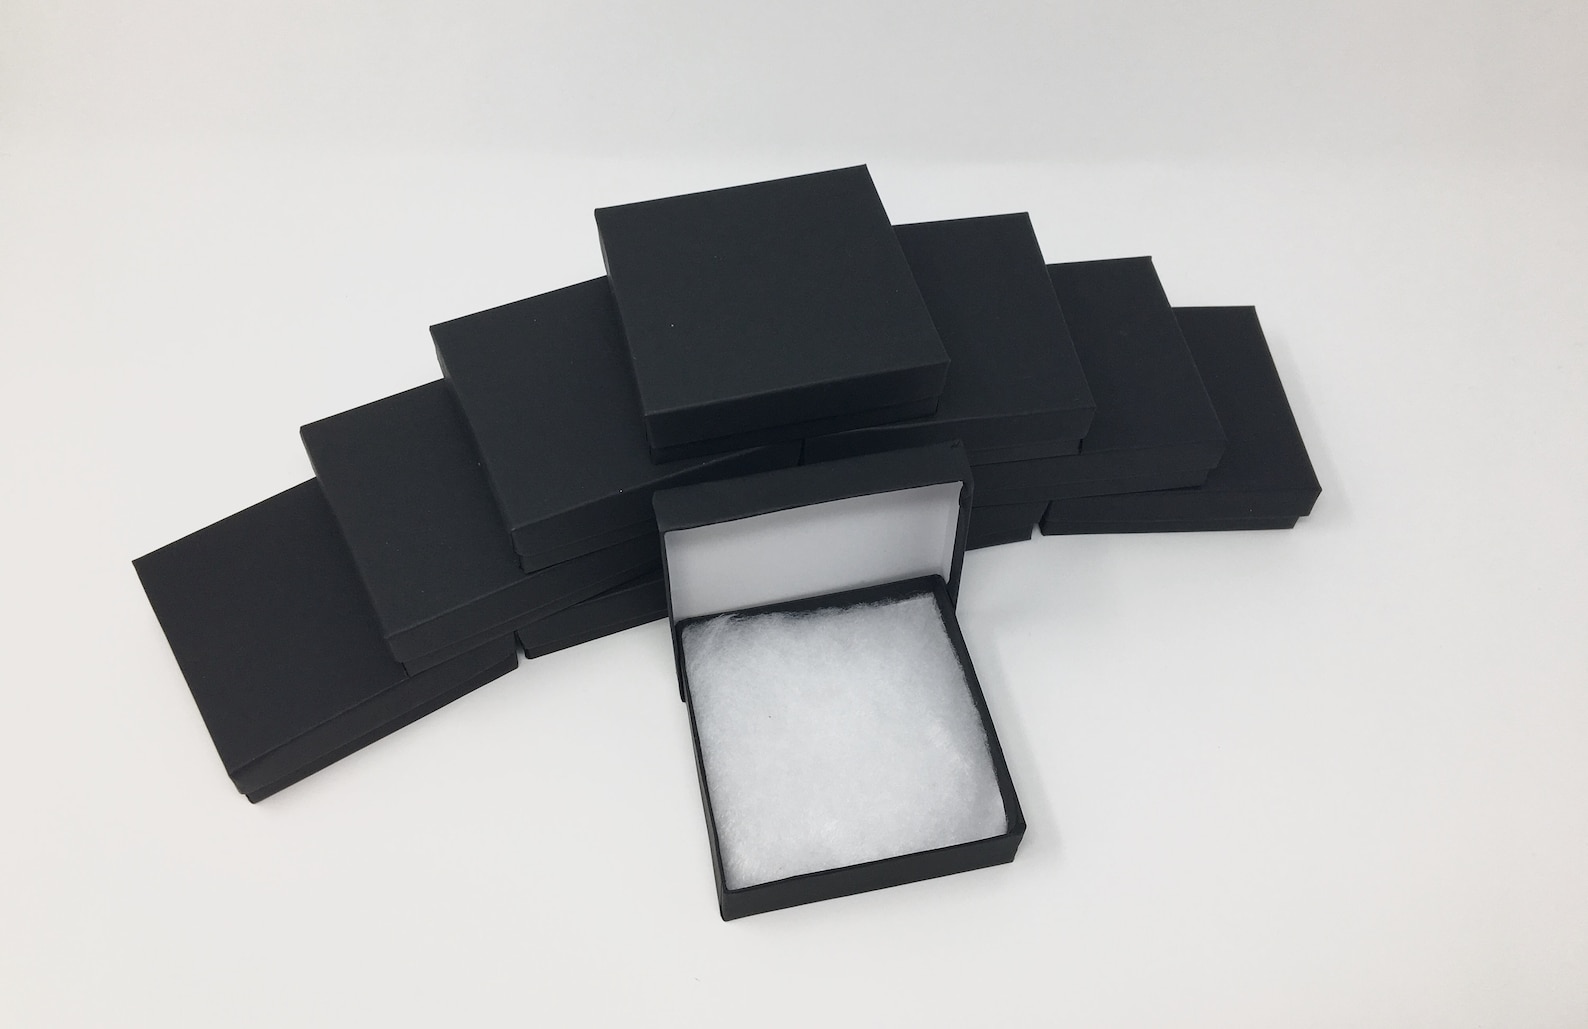 100 Pack Matte Black Boxes 3.5 X 3.5 X 1 In // ECONOMY SIZE - Etsy